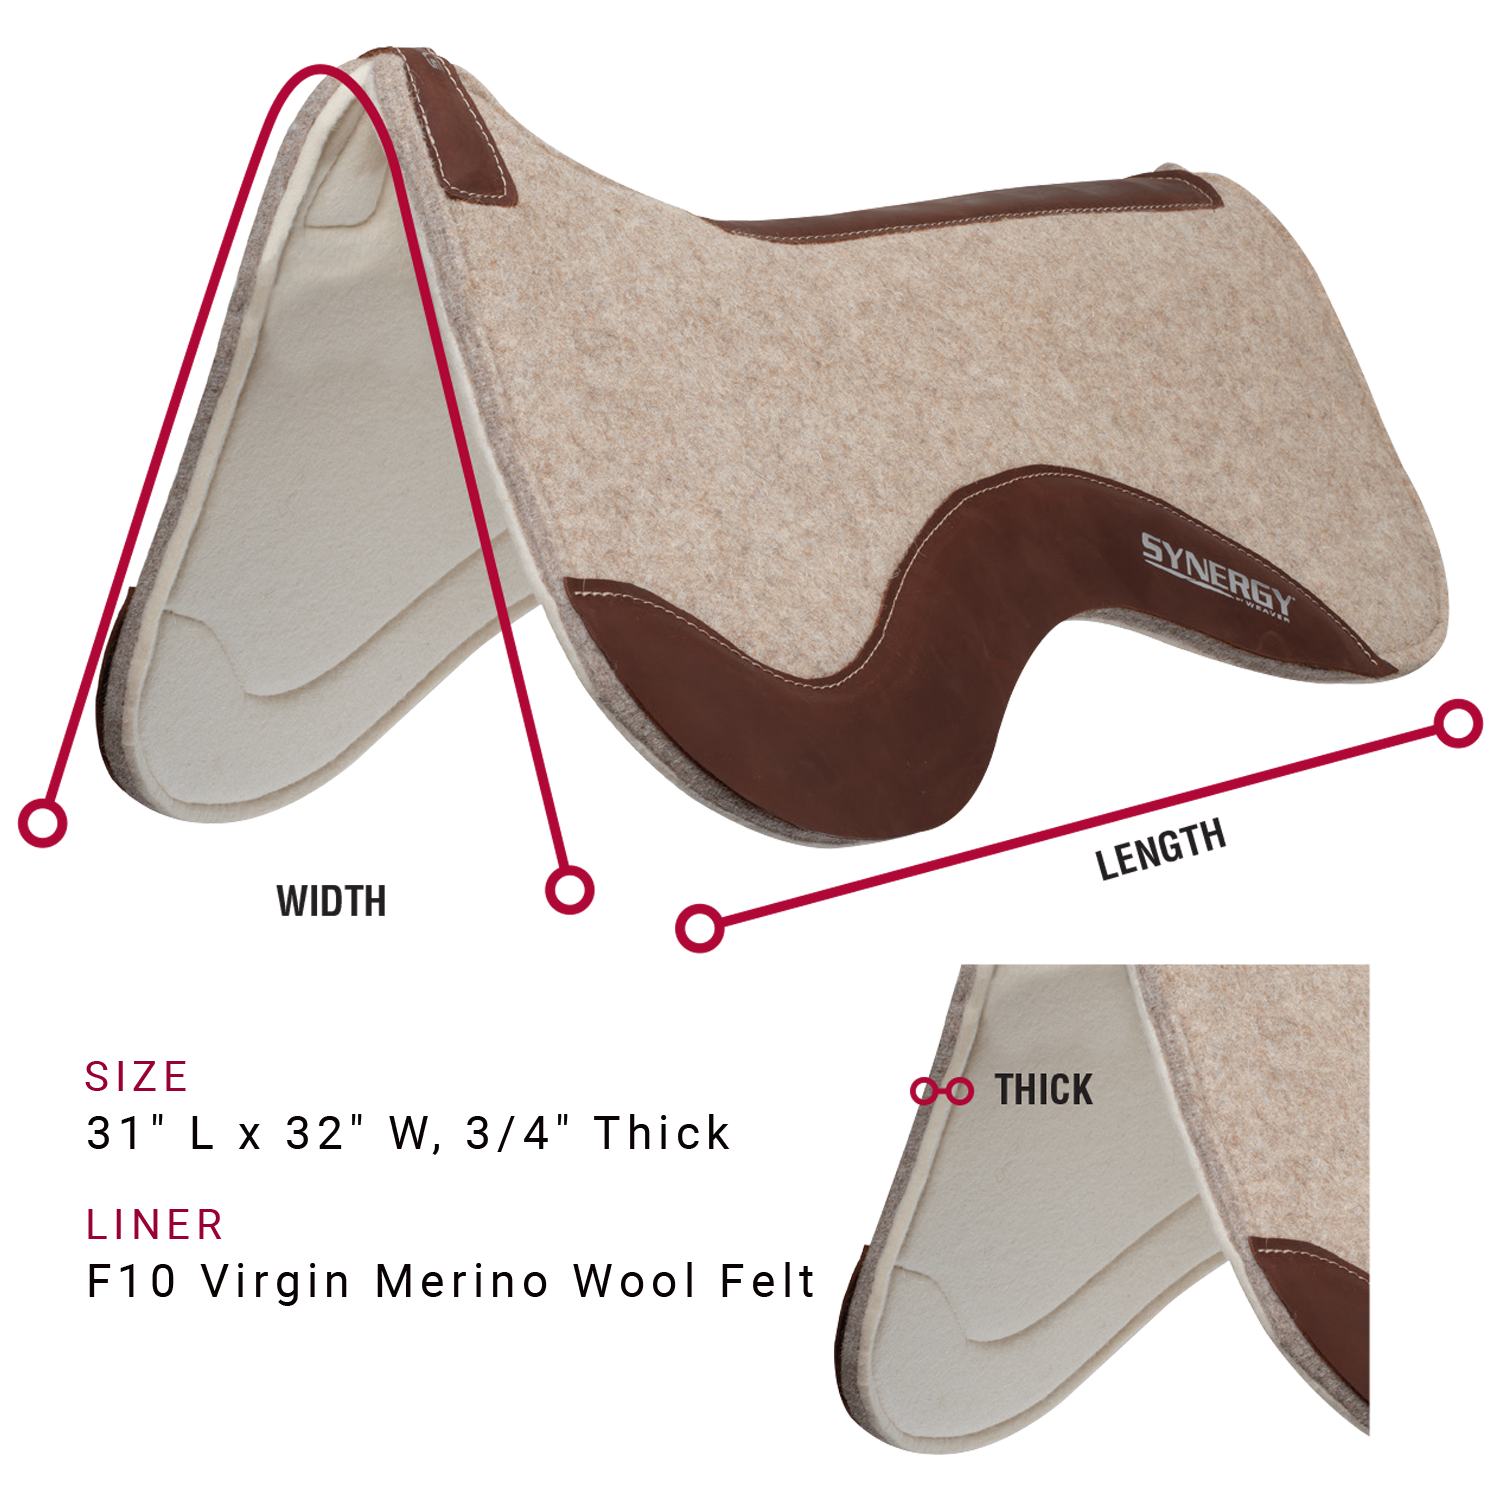 Saddle pad is available in the following sizes: 31 inches long by 32 inches wide, Three-fourths of an inch thick. Saddle pad is available with a F10 virgin merino wool felt liner